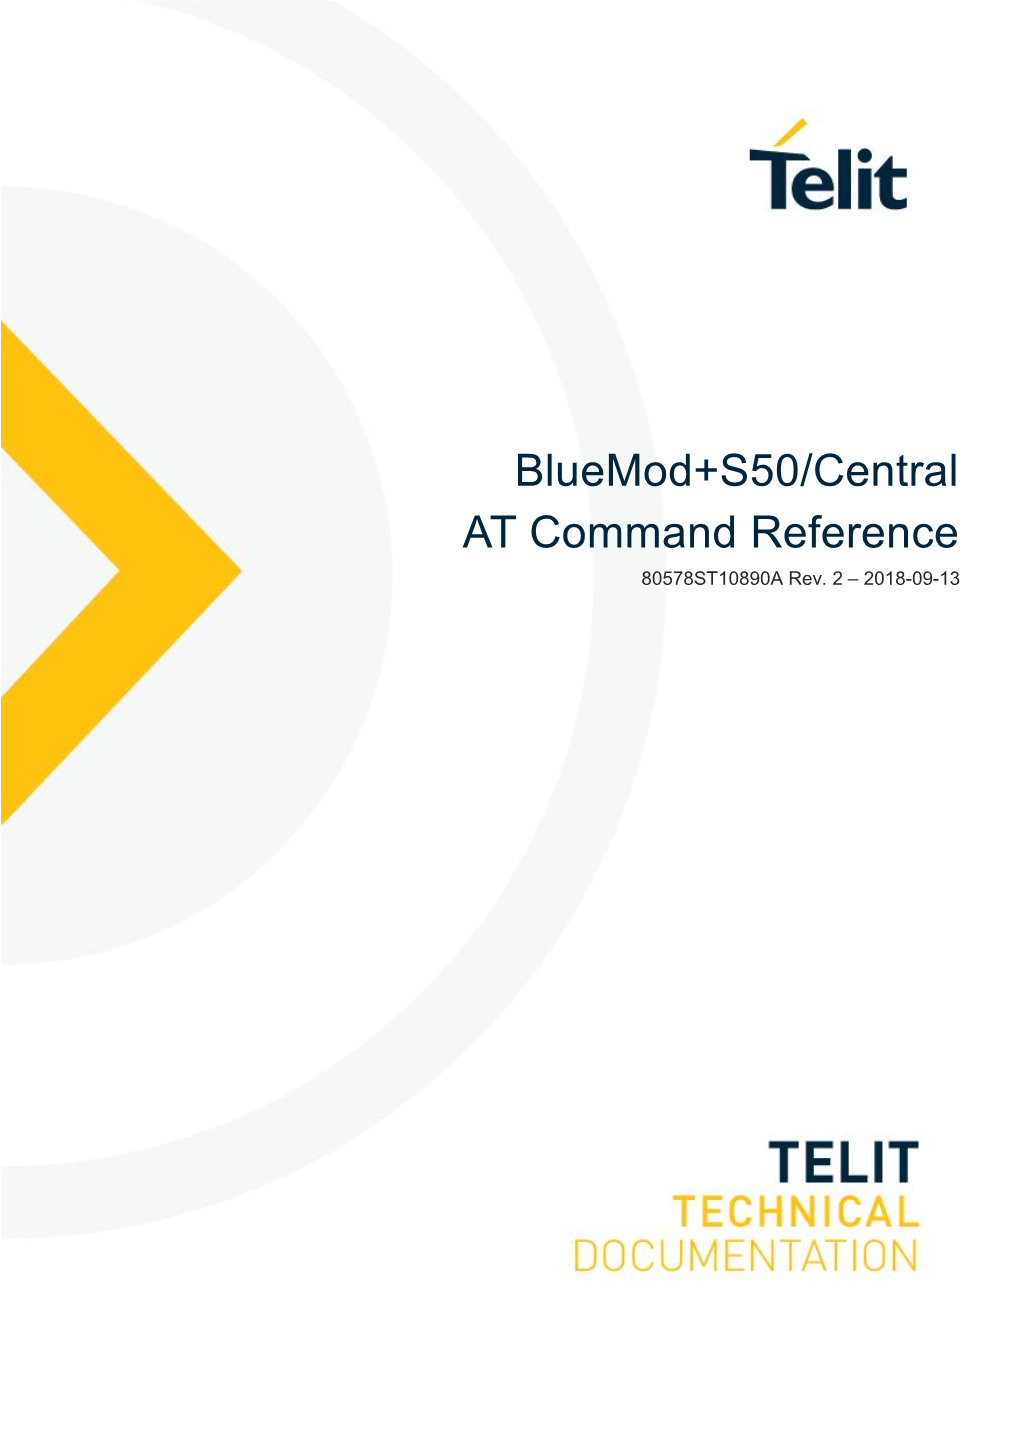 Bluemod+S50/Central at Command Reference 80578ST10890A Rev